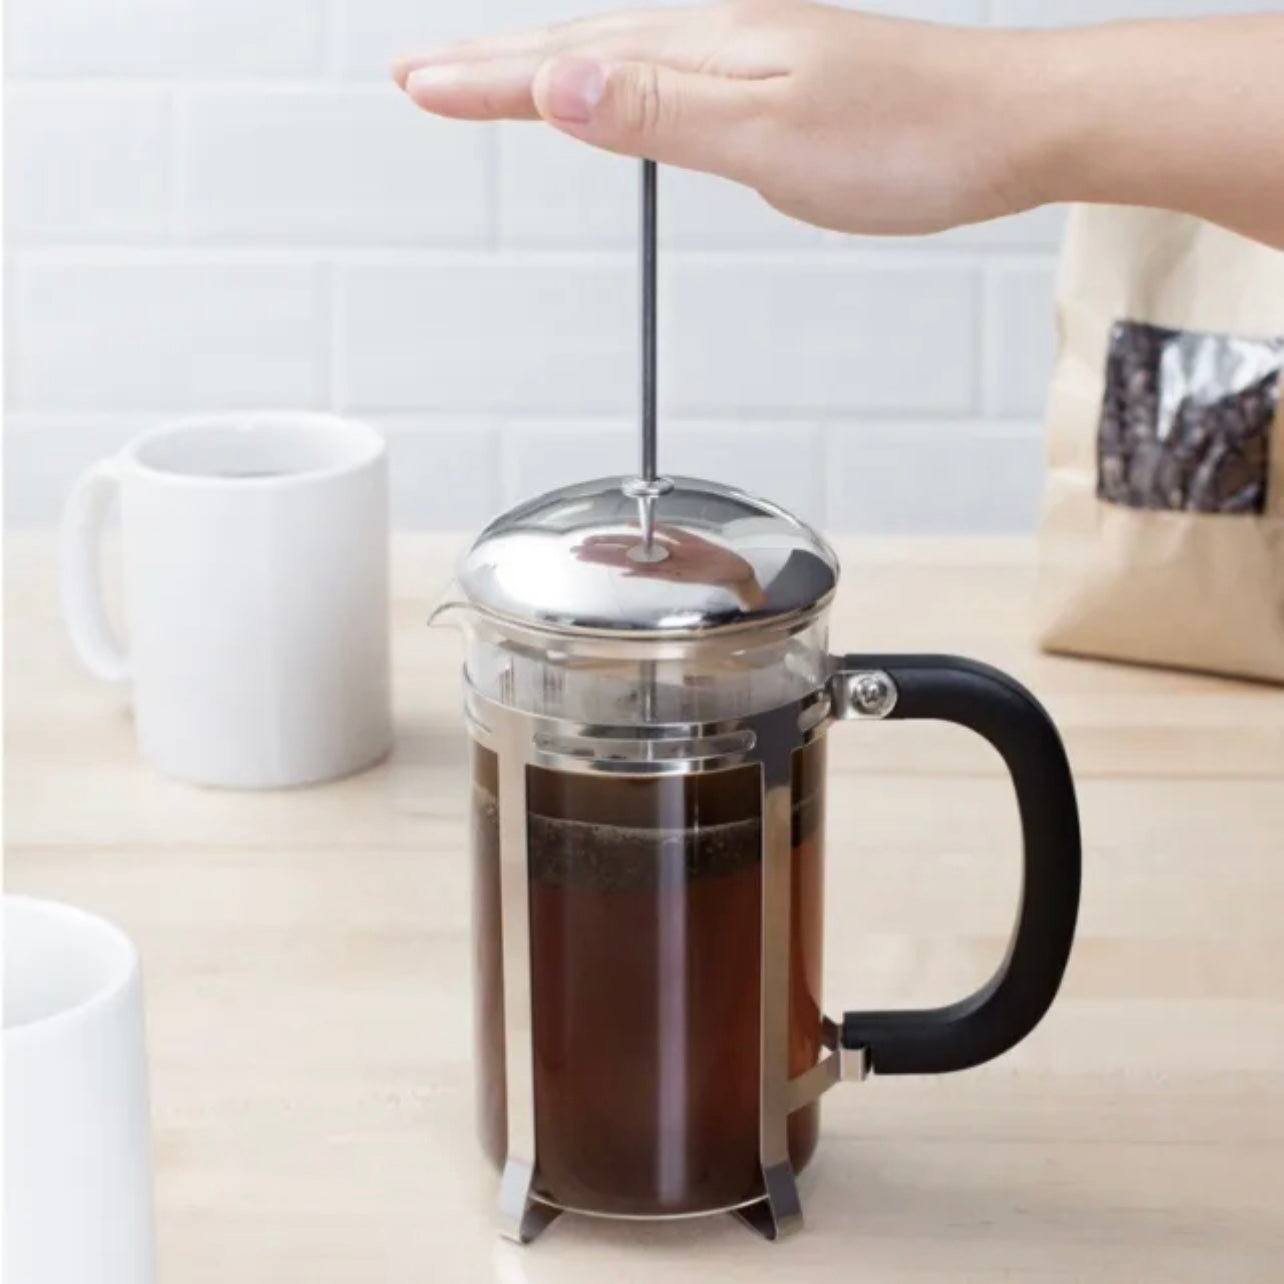 25 oz Tempered Glass Teapot Hot Tea Maker with Stainless Steel